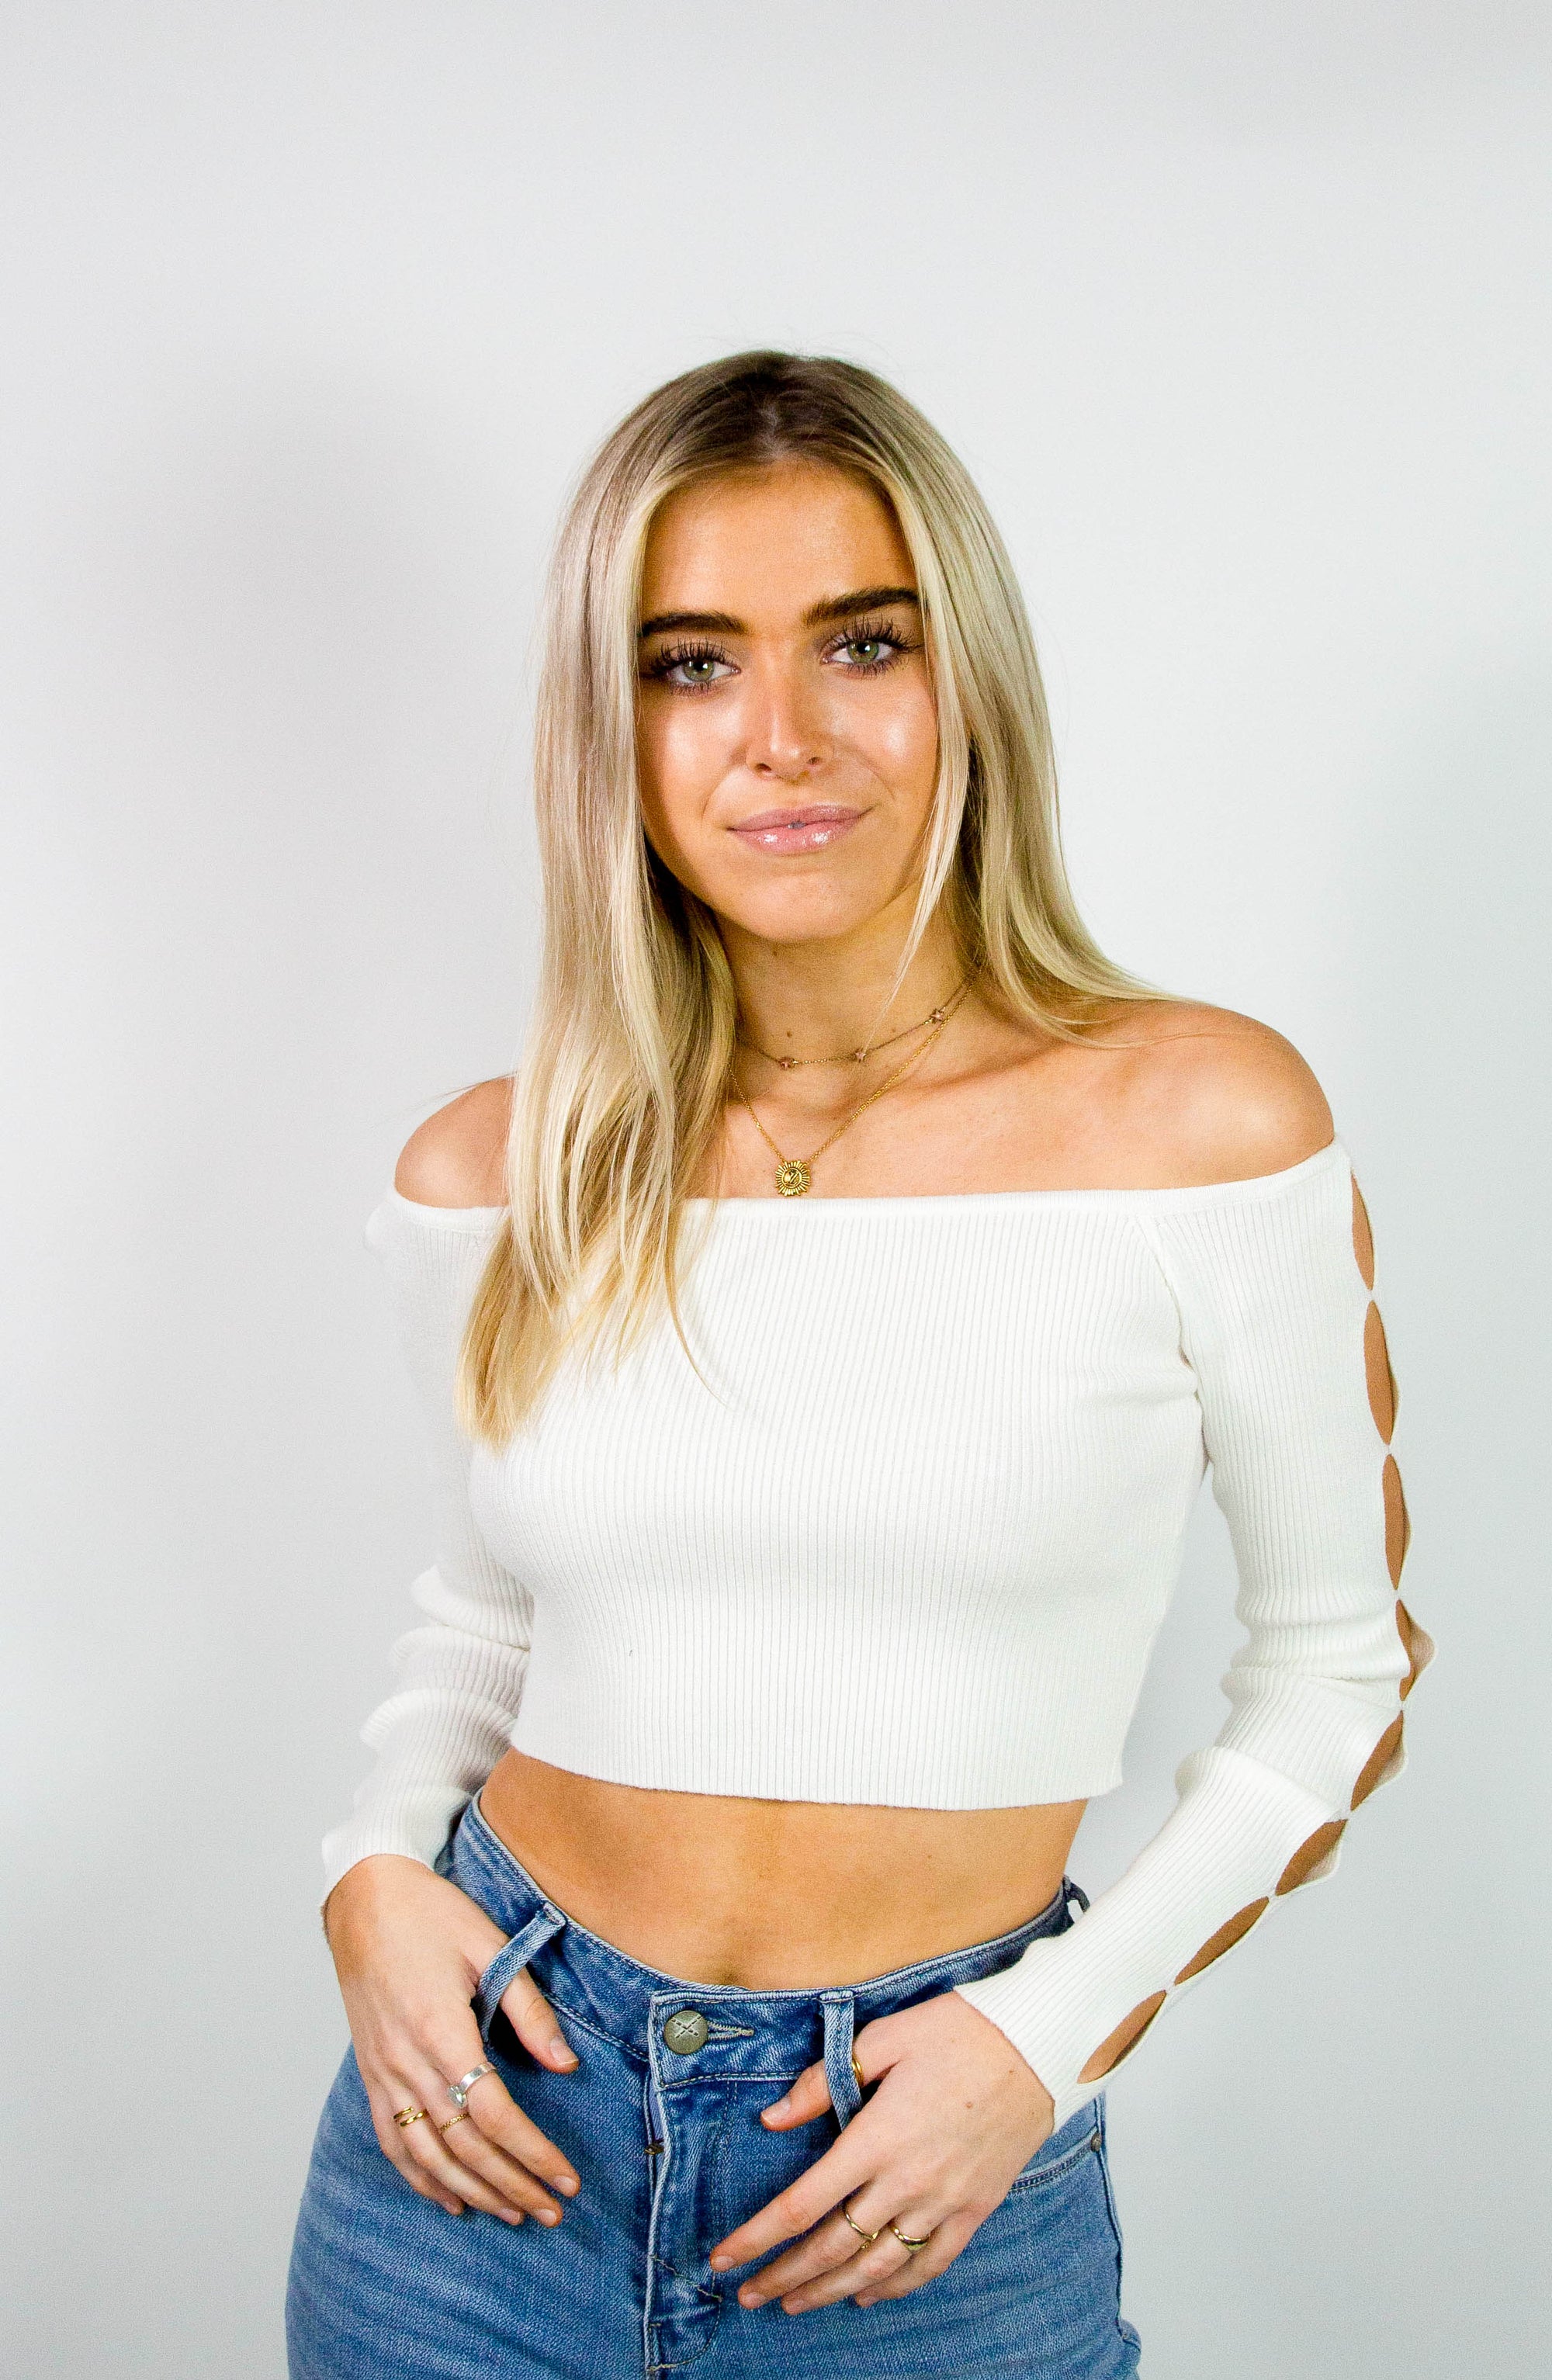 Ribbed Crop Top w/Cut Outs